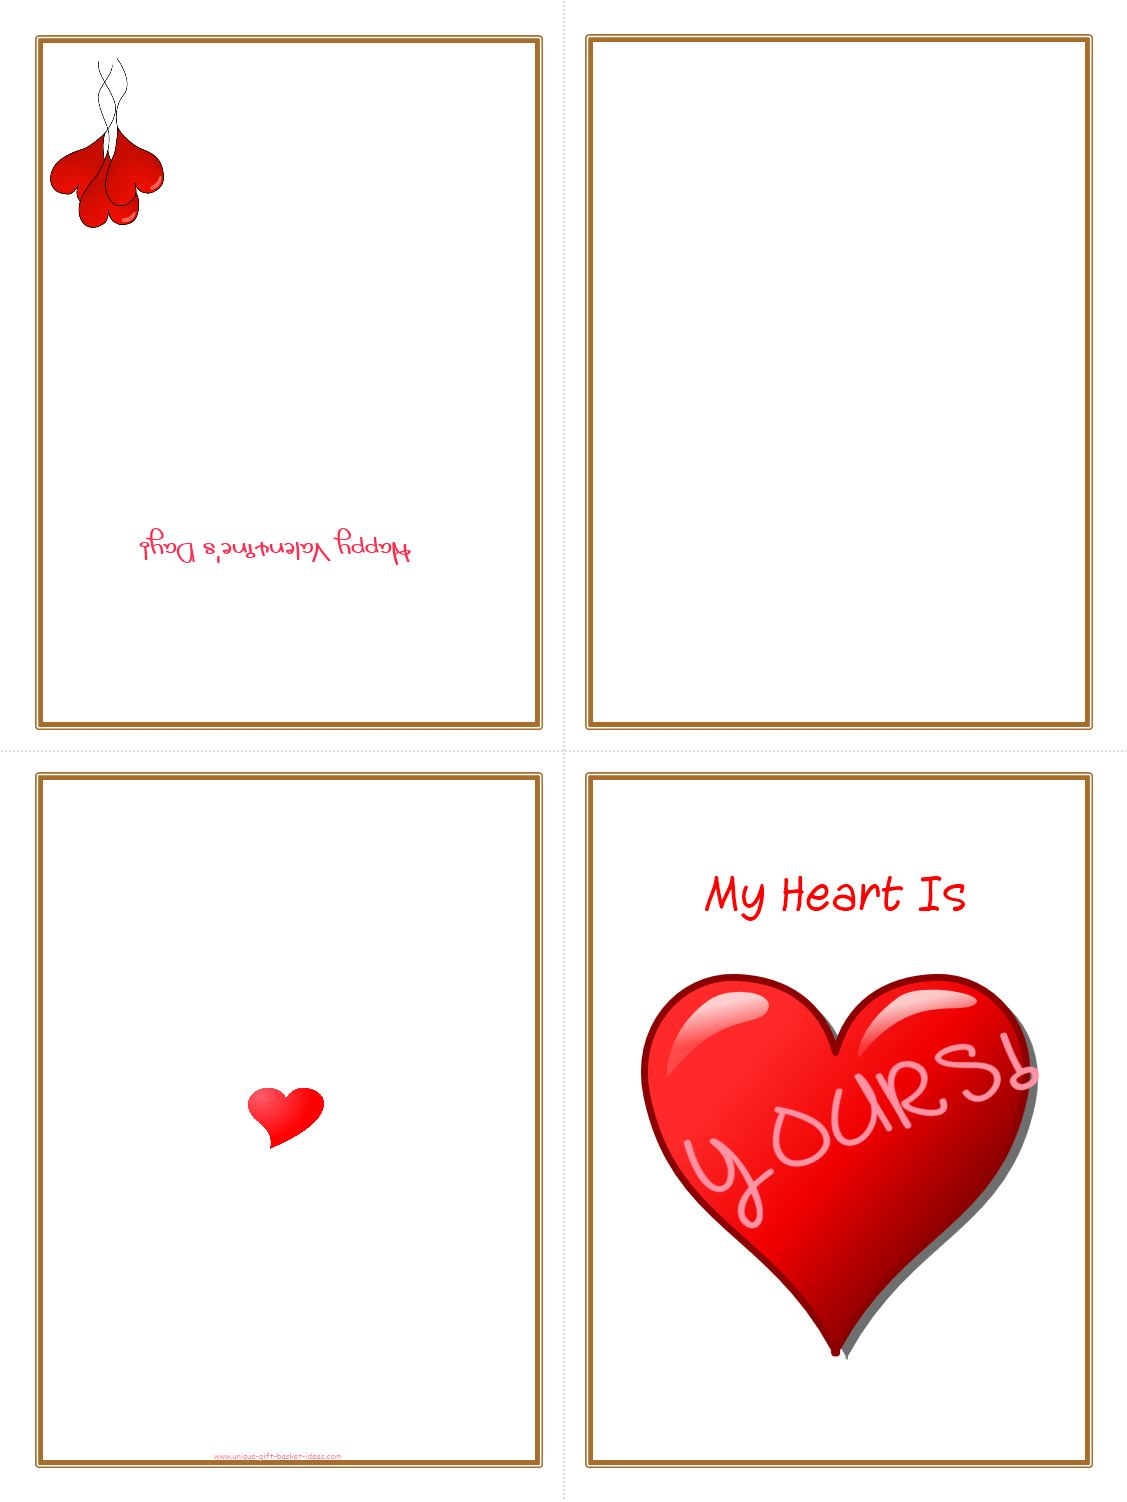 8 Best Images of Free Printable Fold Valentine Cards - Free Printable ...